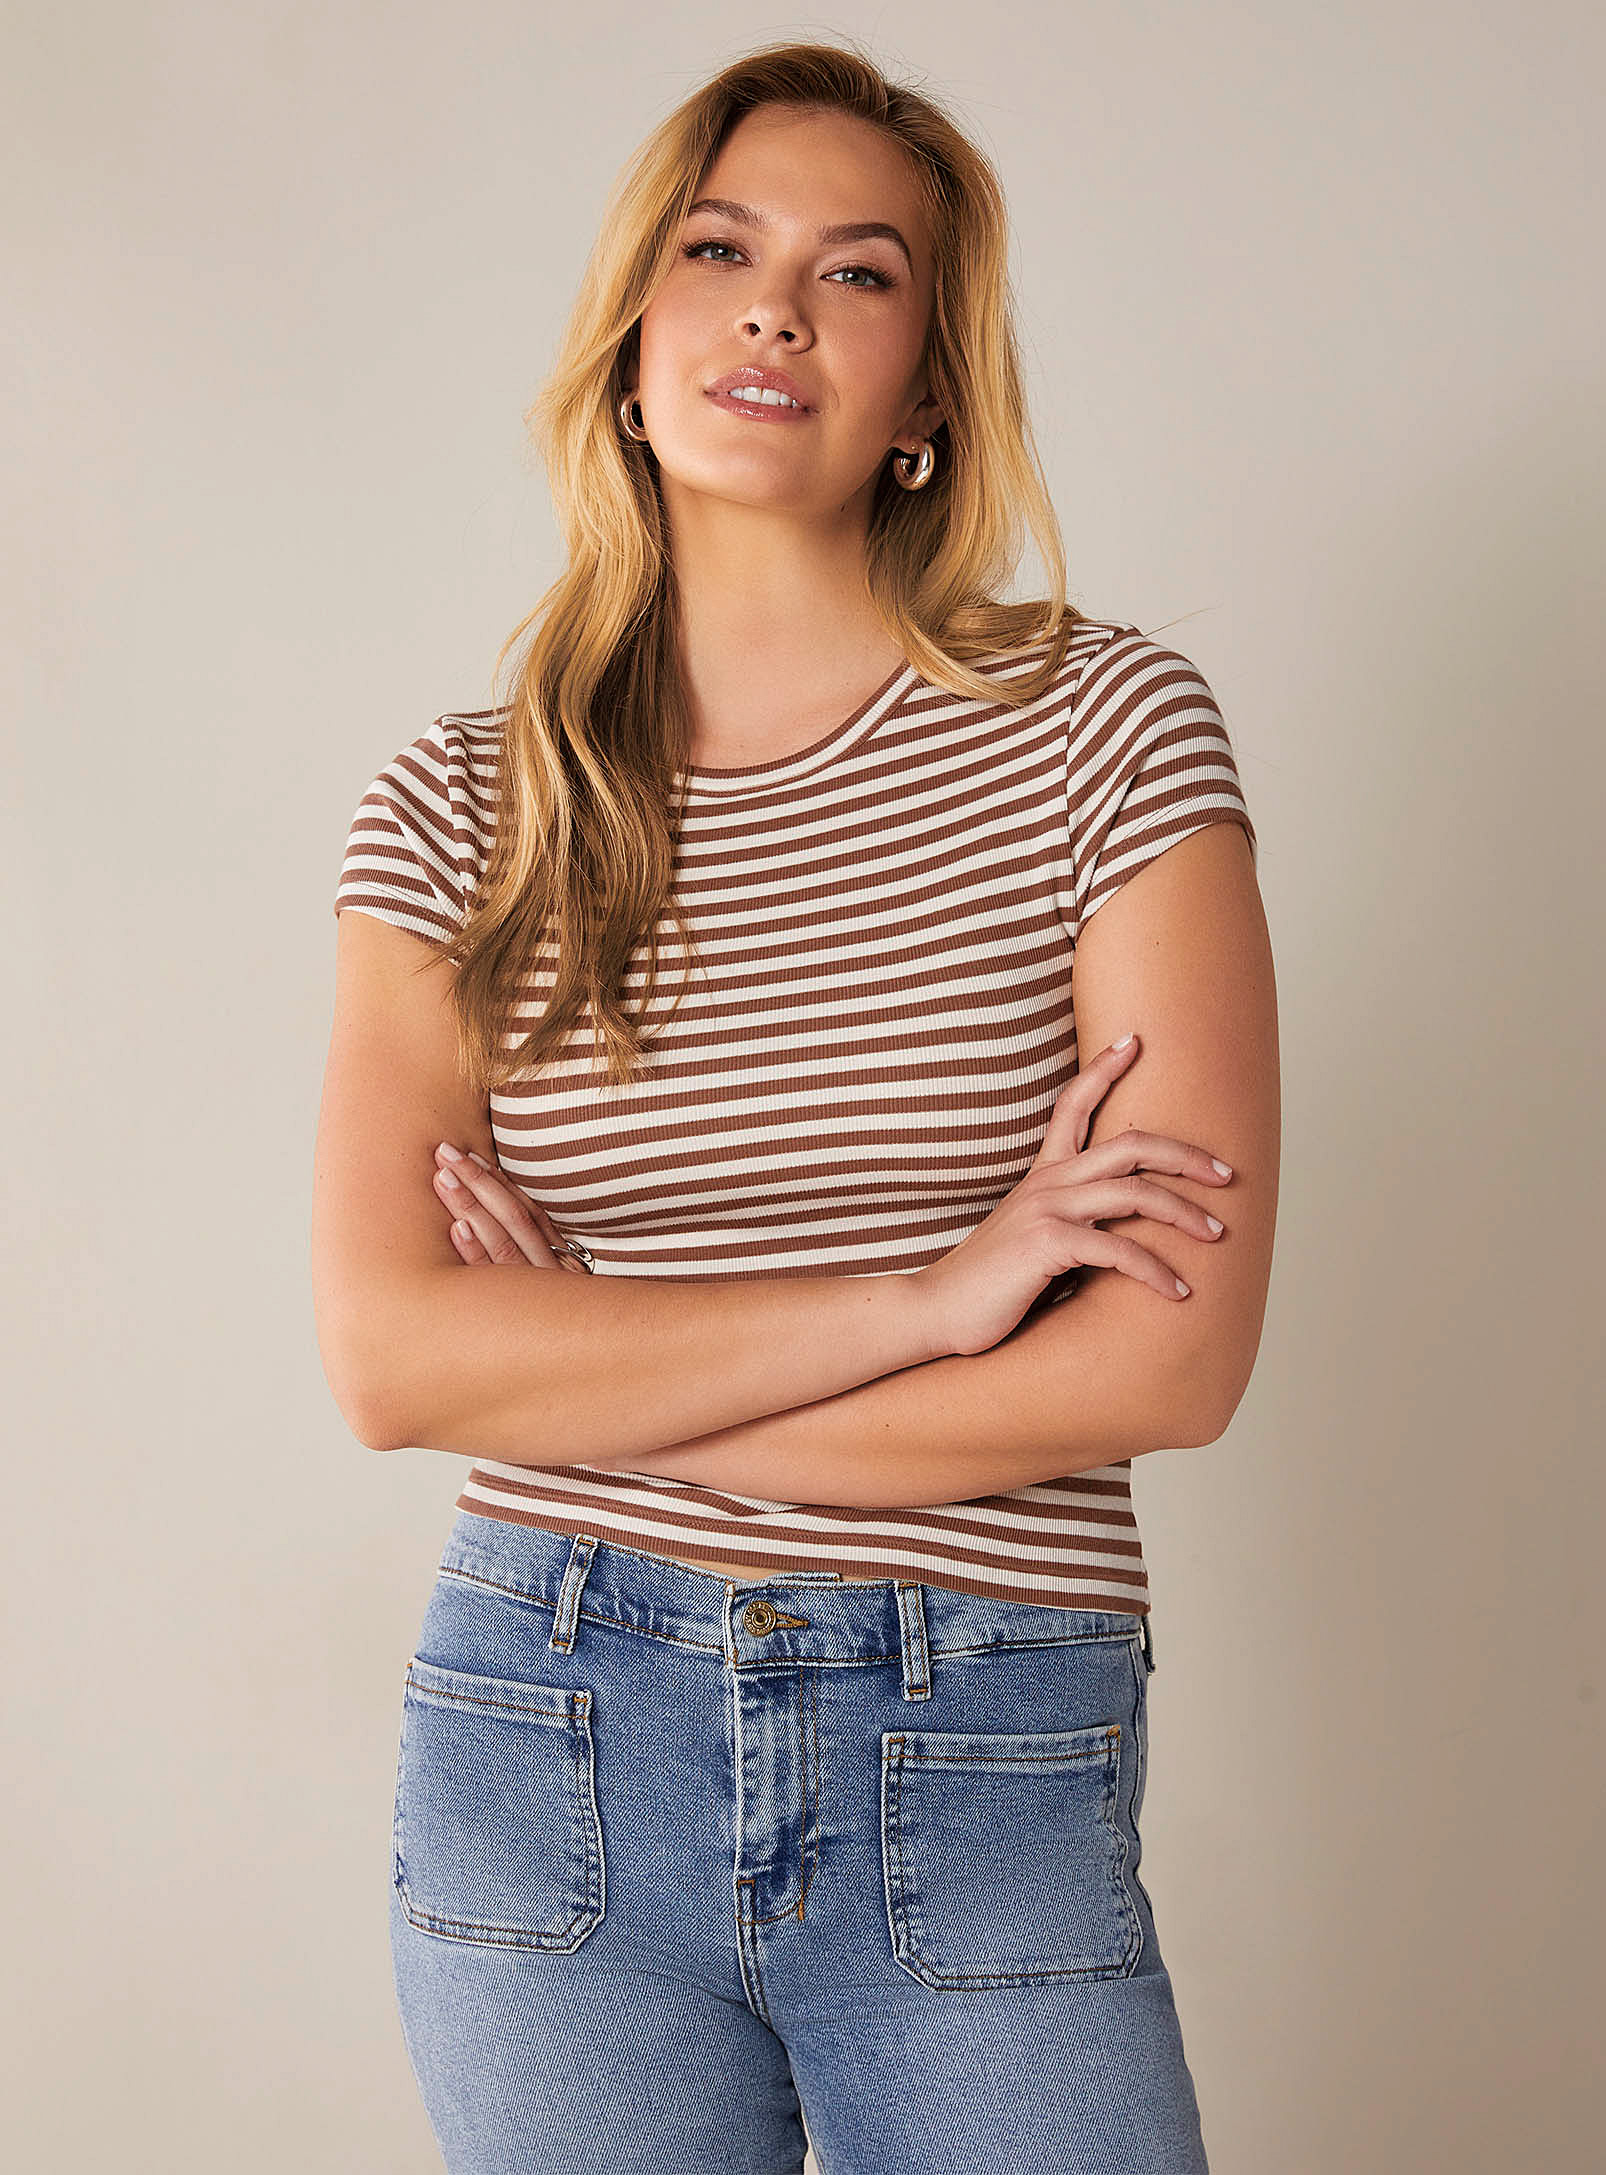 Splendid Contrasting Stripes Cropped T-shirt In Patterned Brown